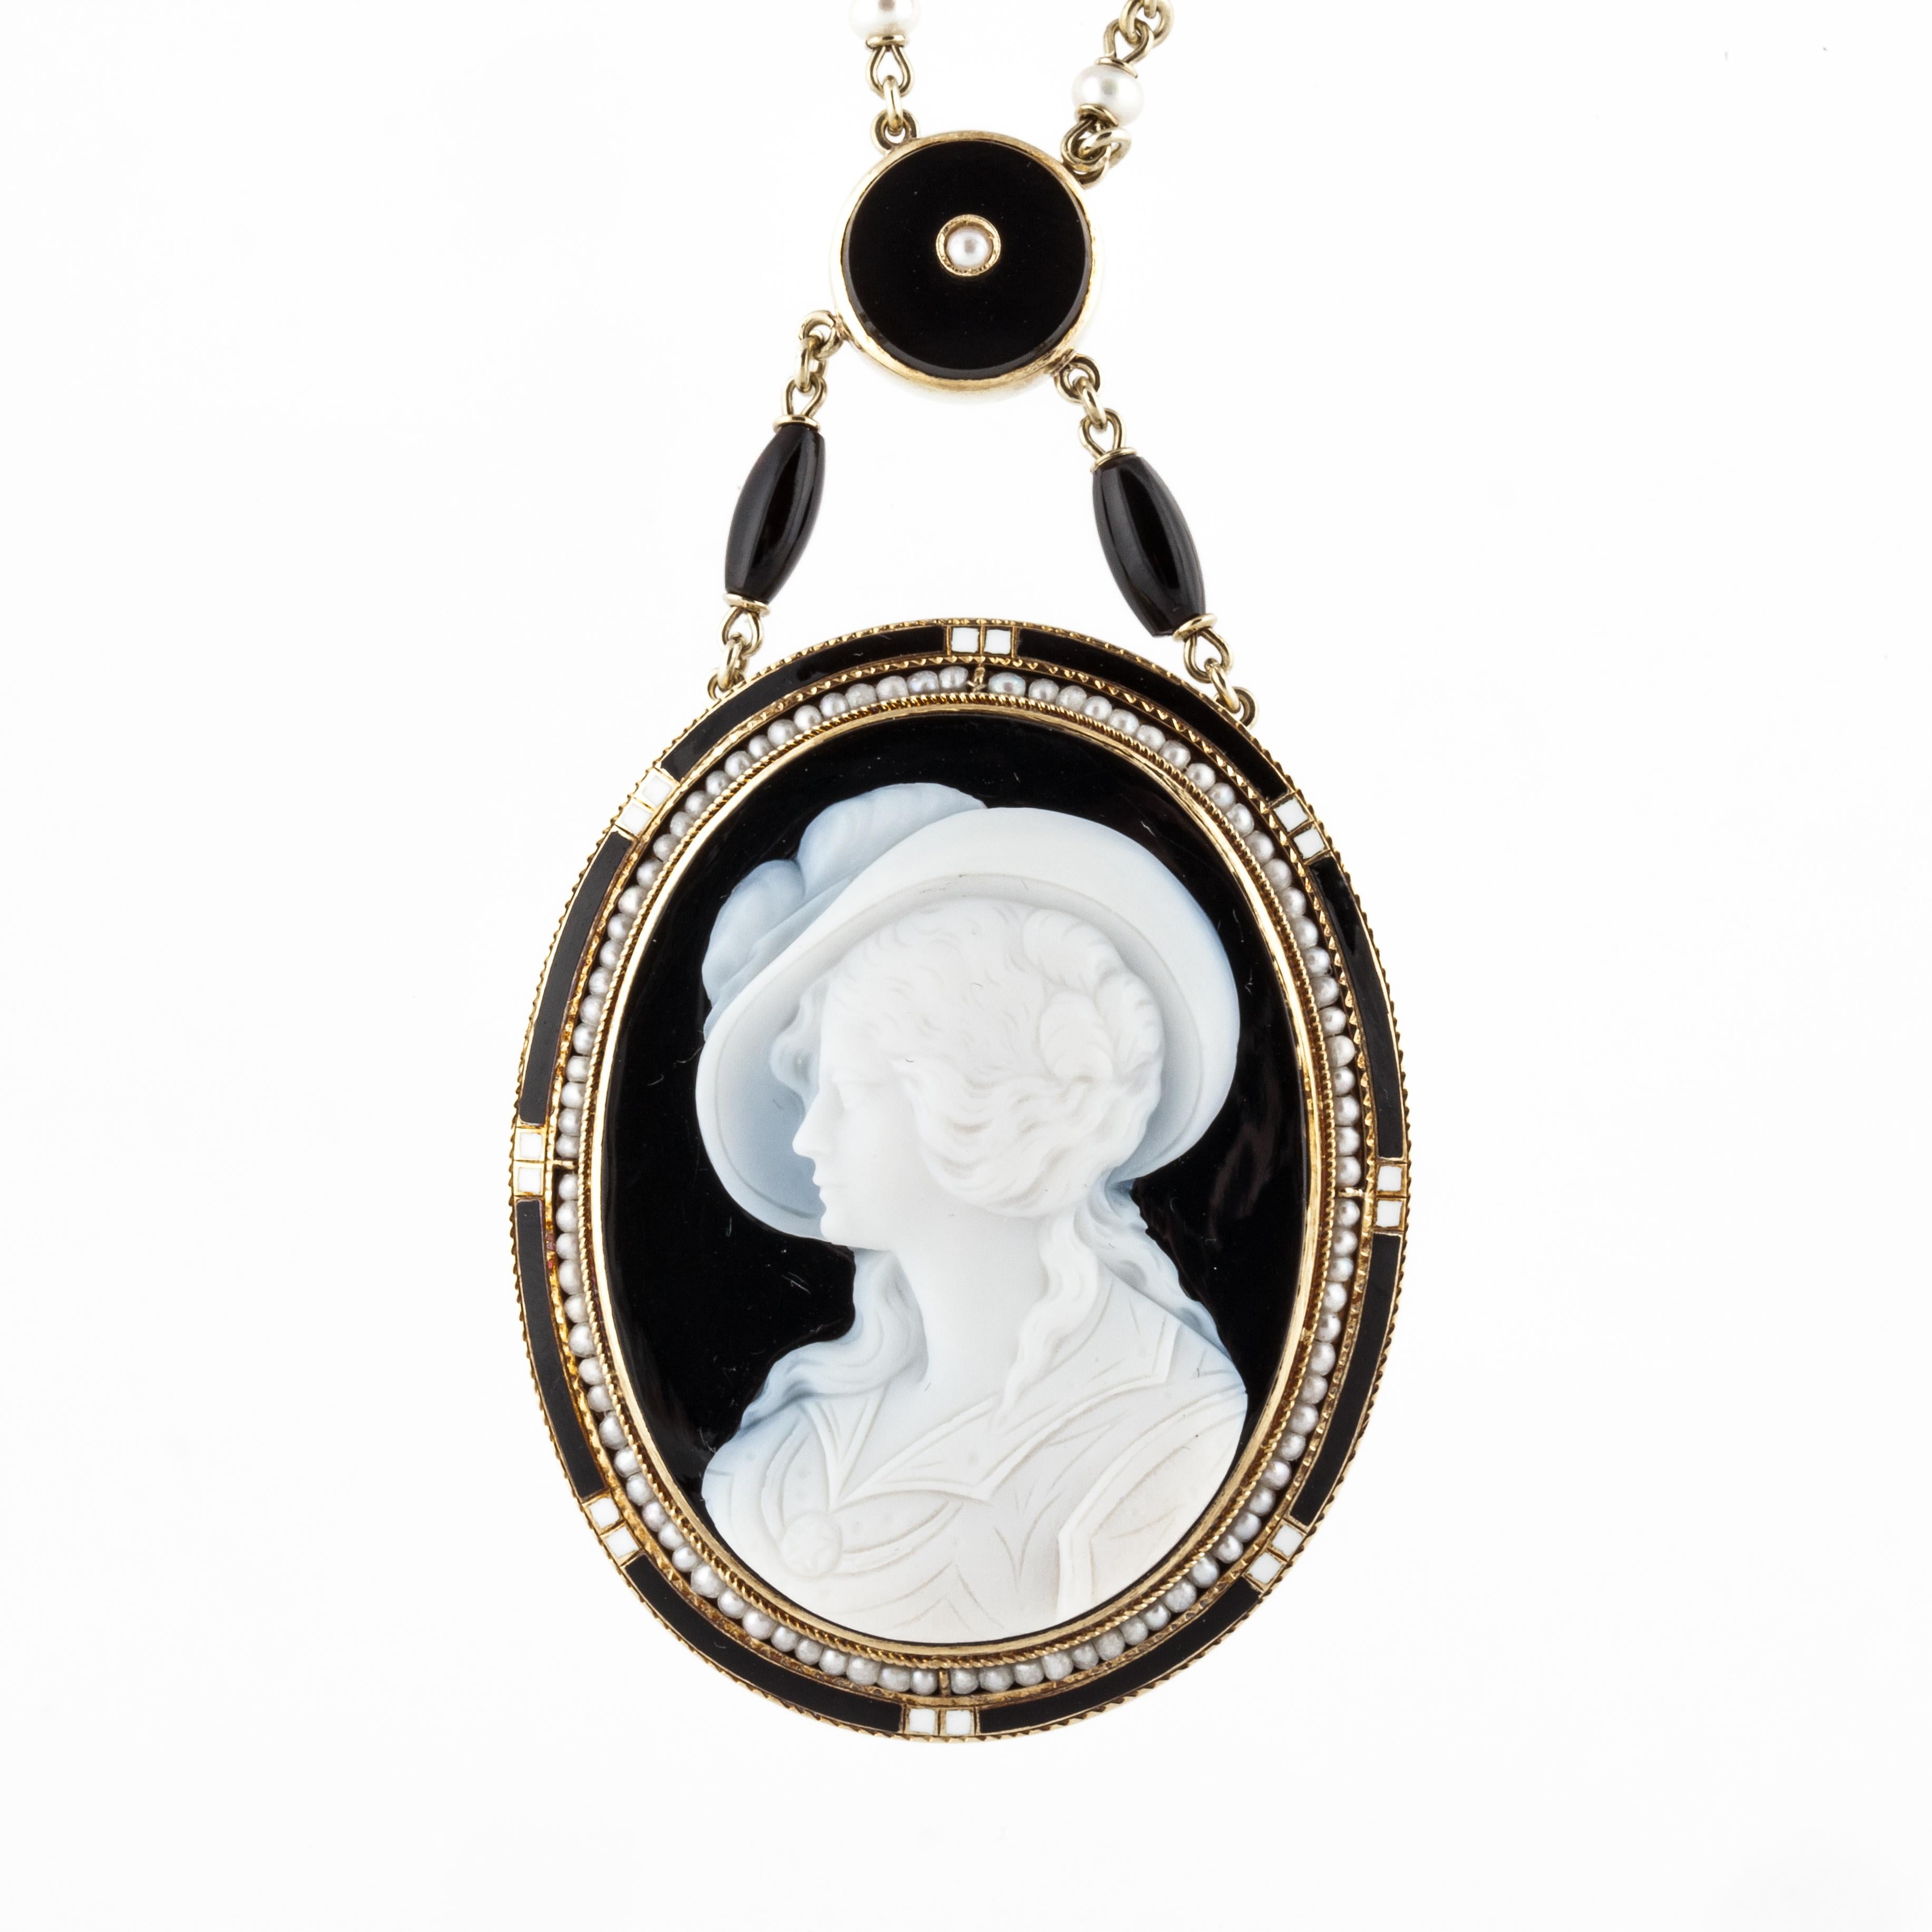 Bead Victorian Hardstone Cameo Mourning Necklace in 14K Gold